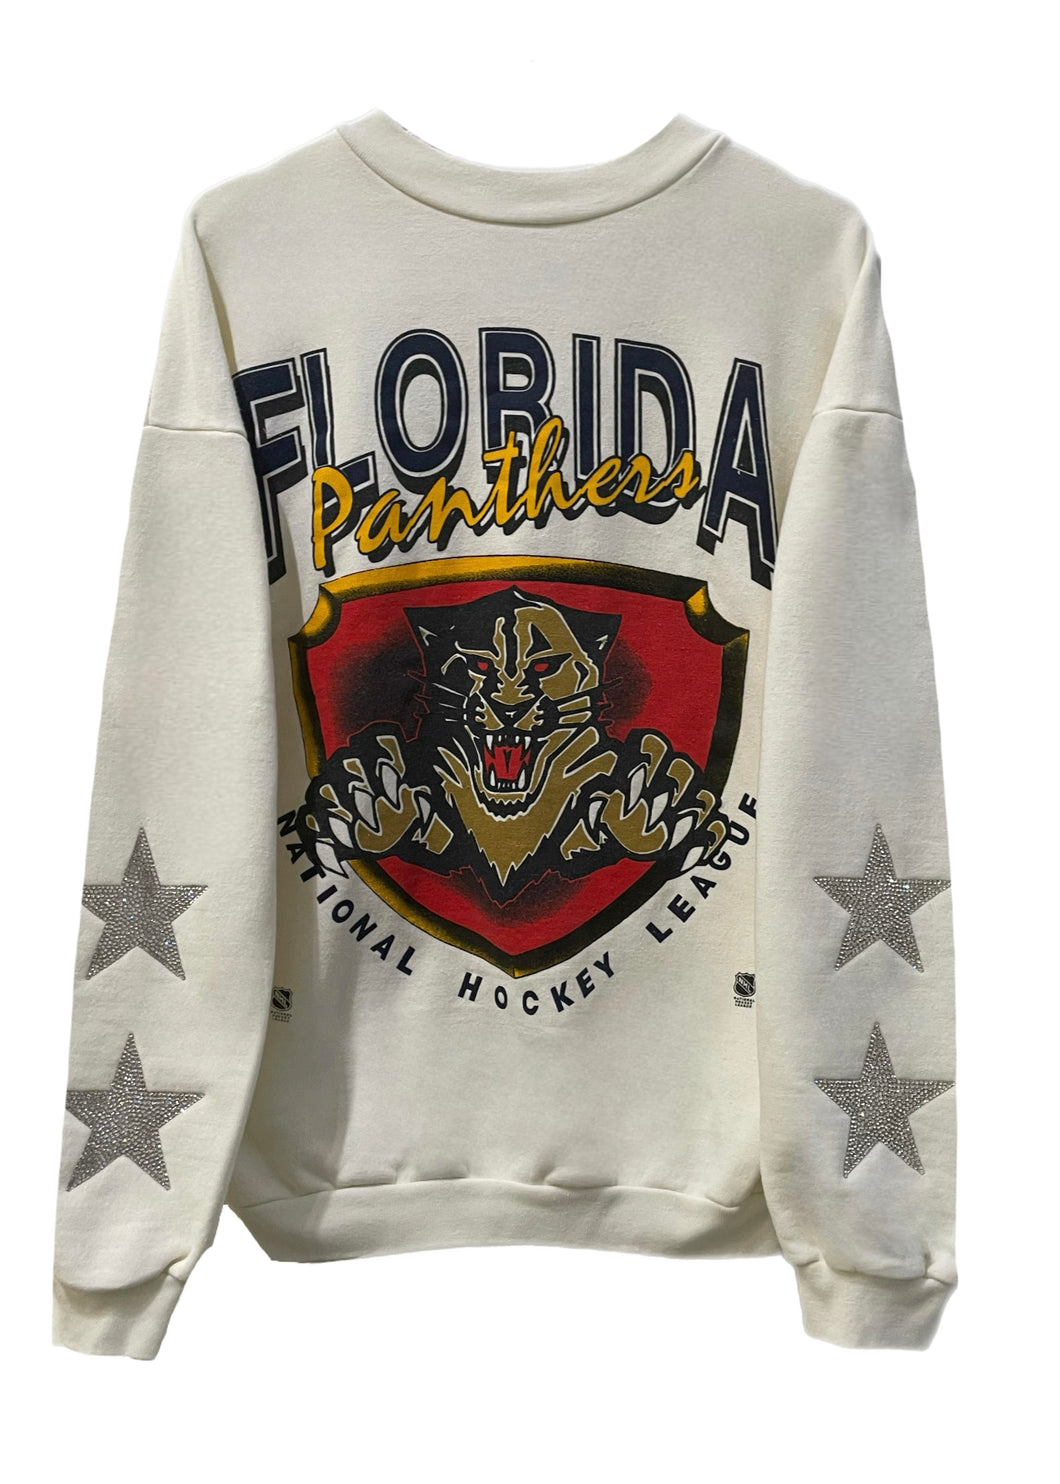 Florida Panthers, Hockey One of a KIND Vintage ”Rare Find”  Sweatshirt with Crystal Star Design